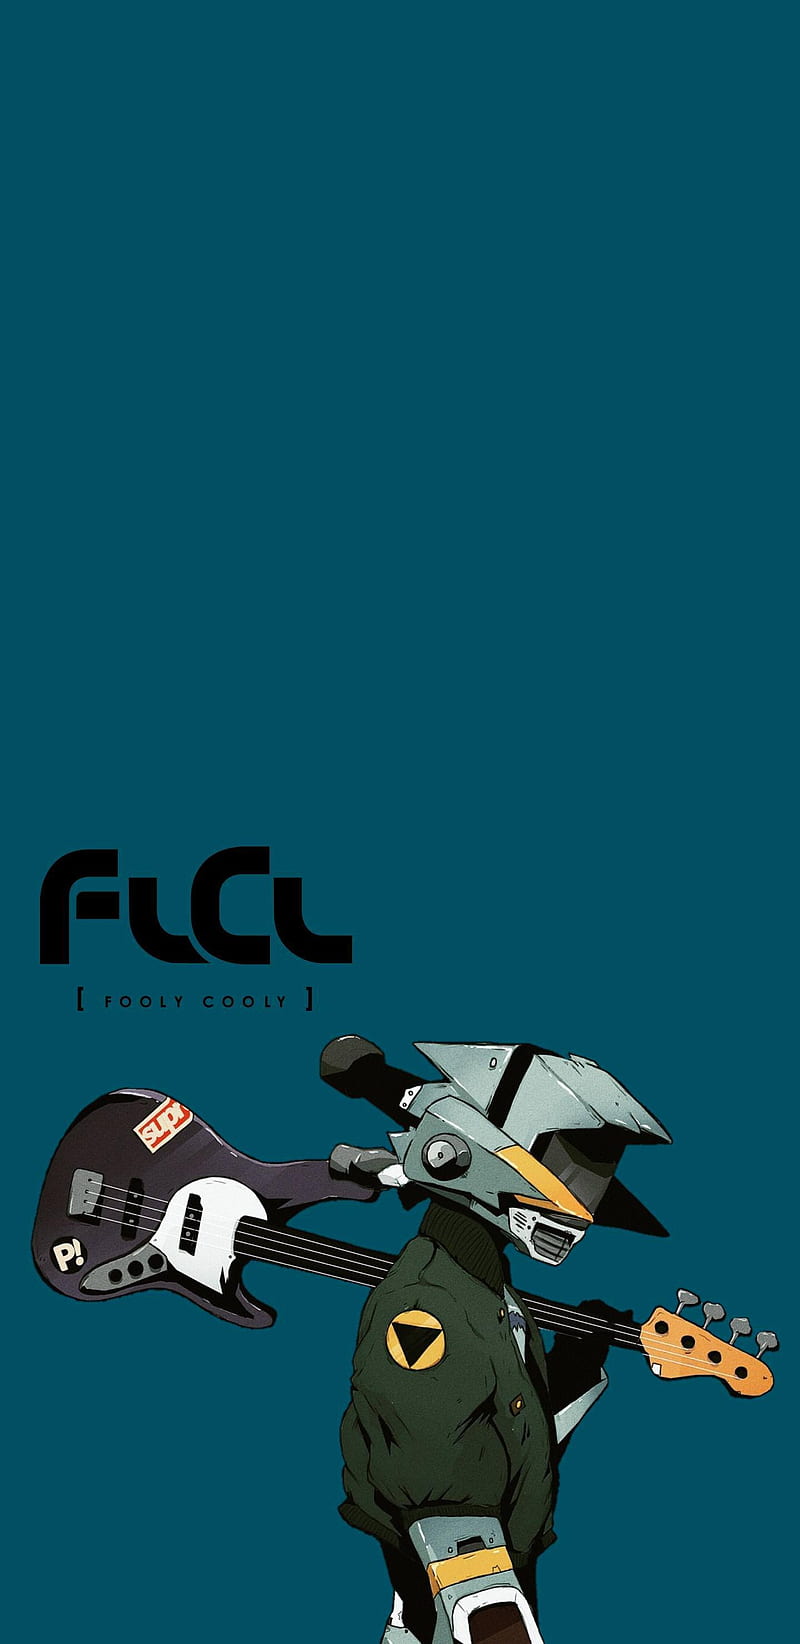 Adult Swim Reviving FLCL for Two Seasons | The Mary Sue